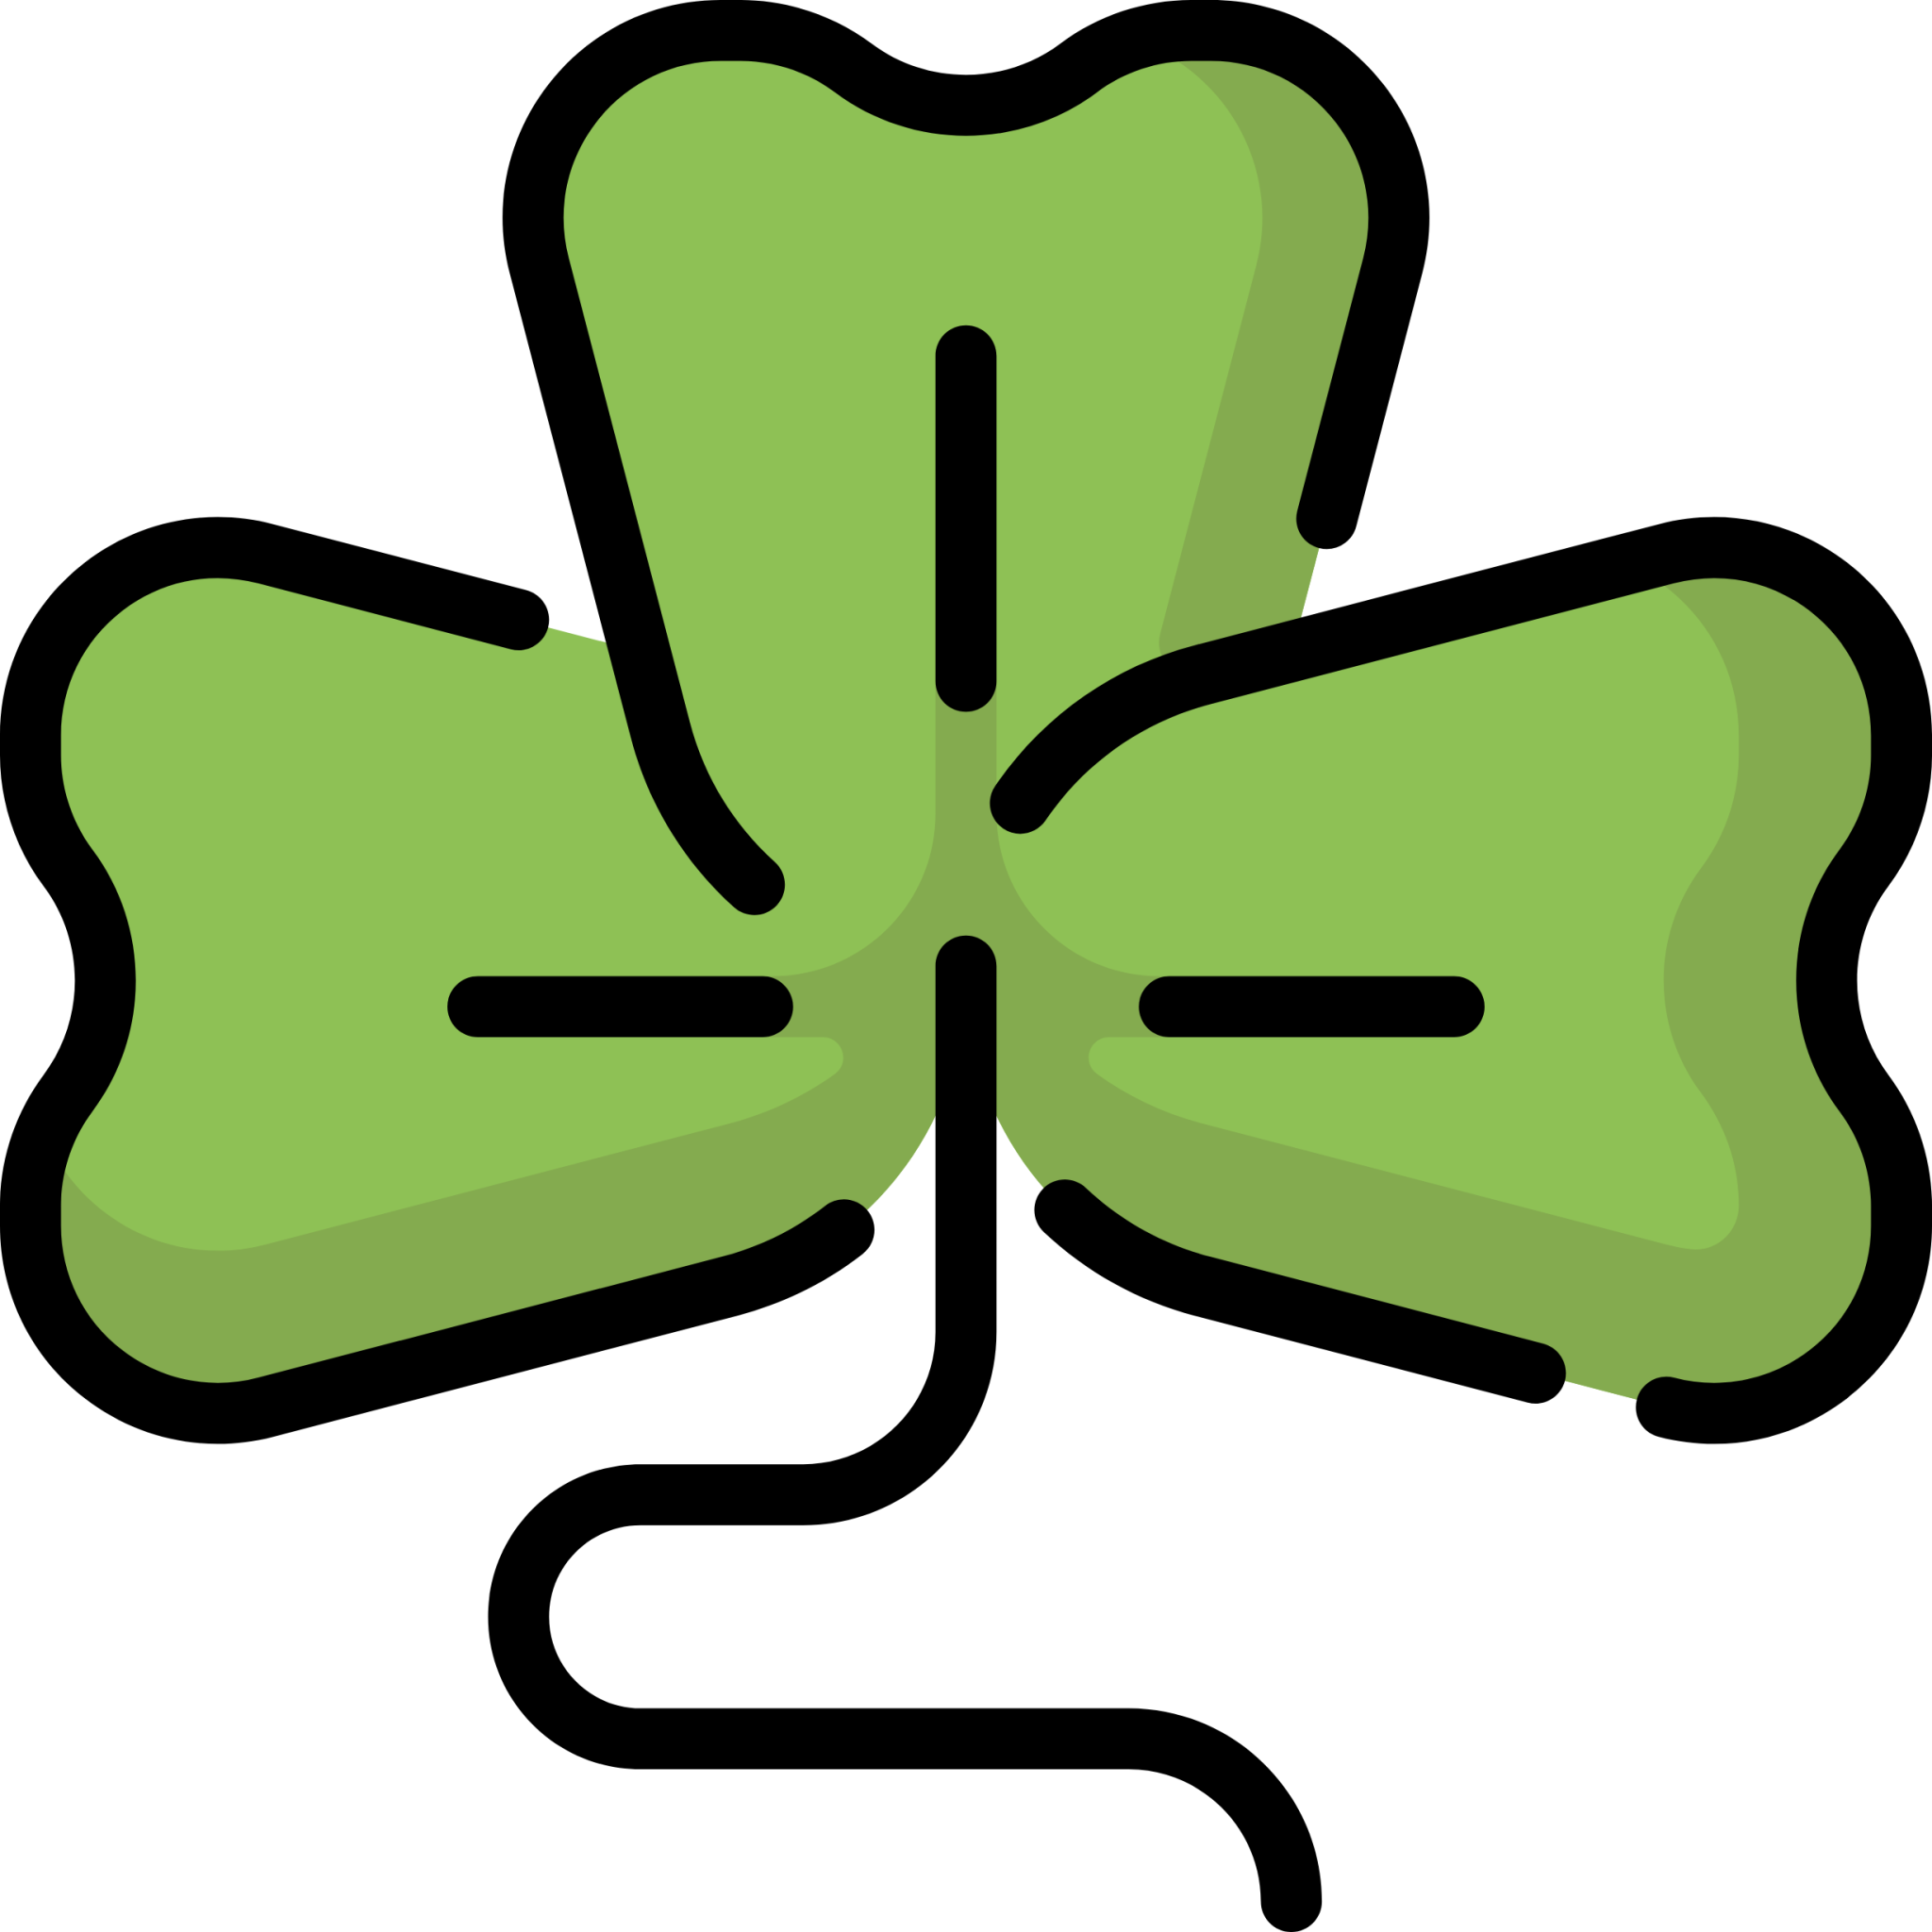 clover spiked Icon - Download for free – Iconduck